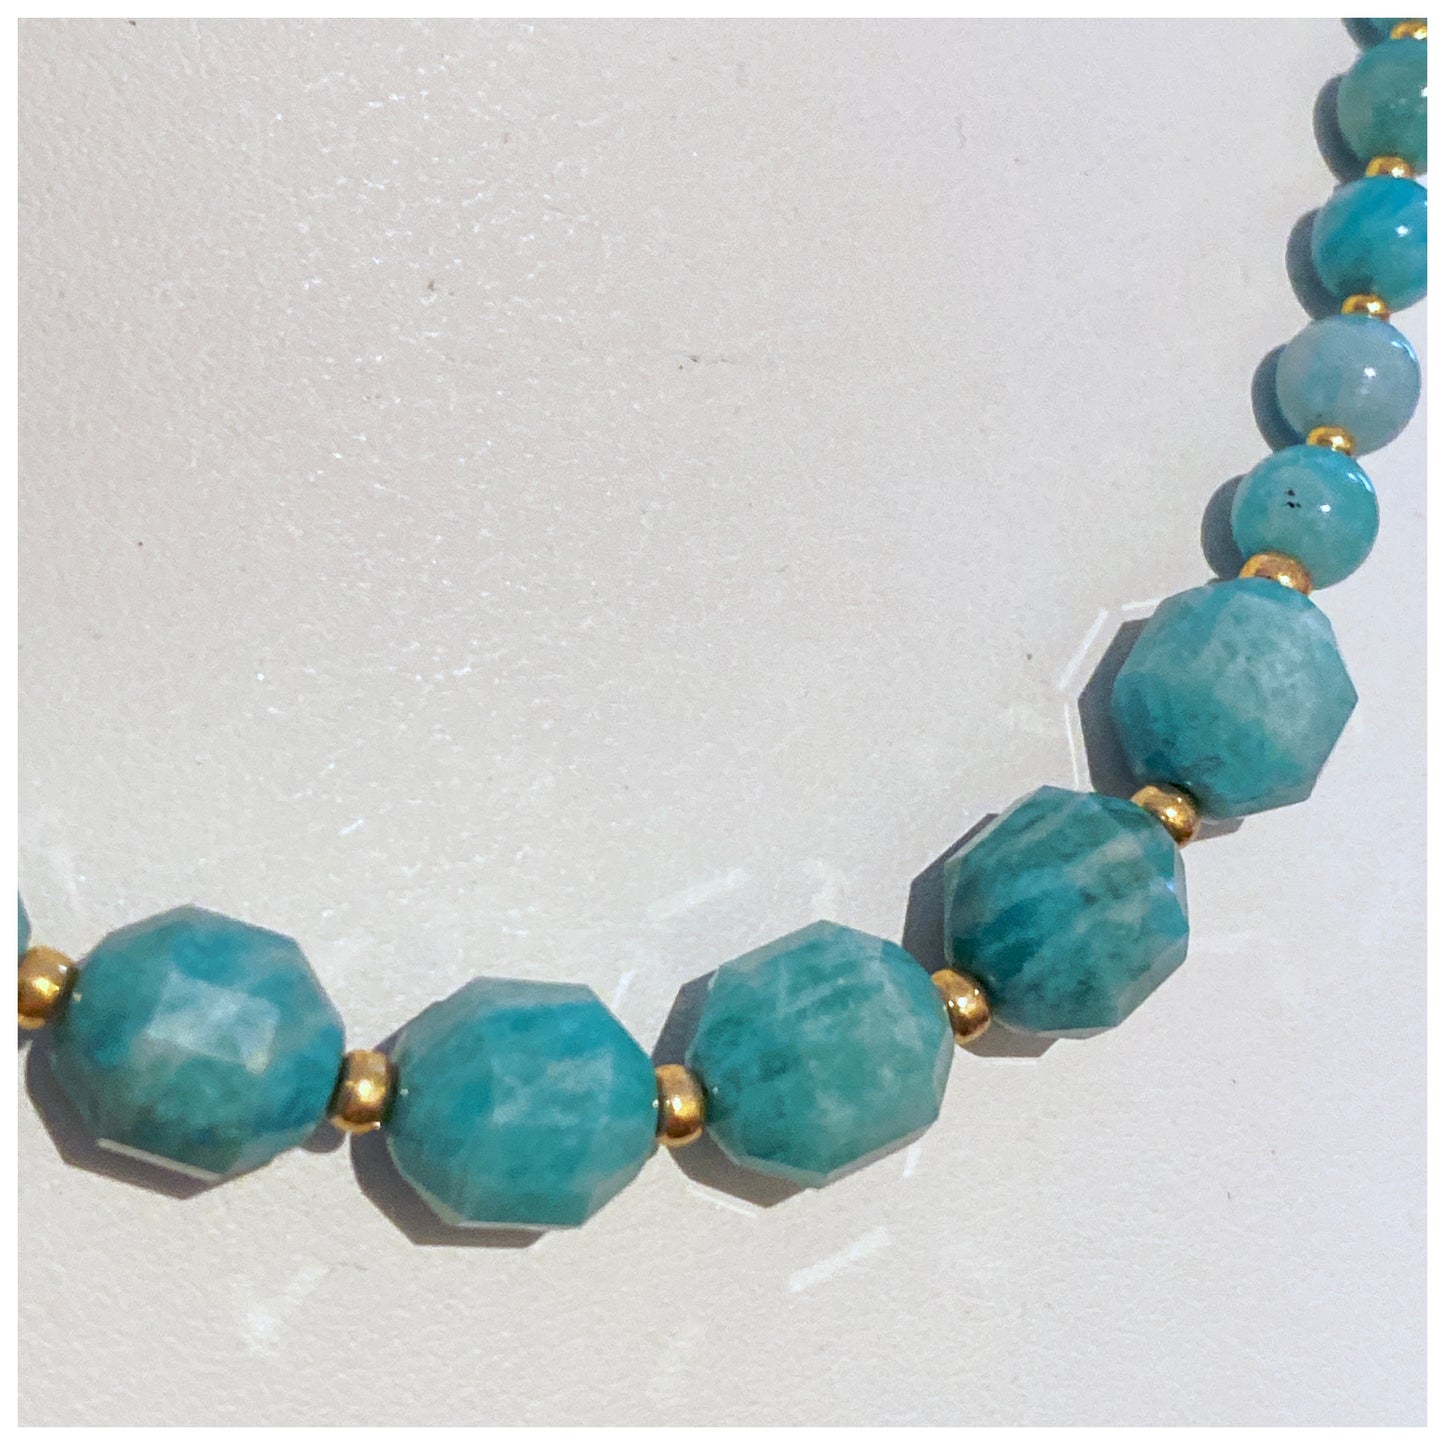 Amazonite necklace  with a magnetic clasp